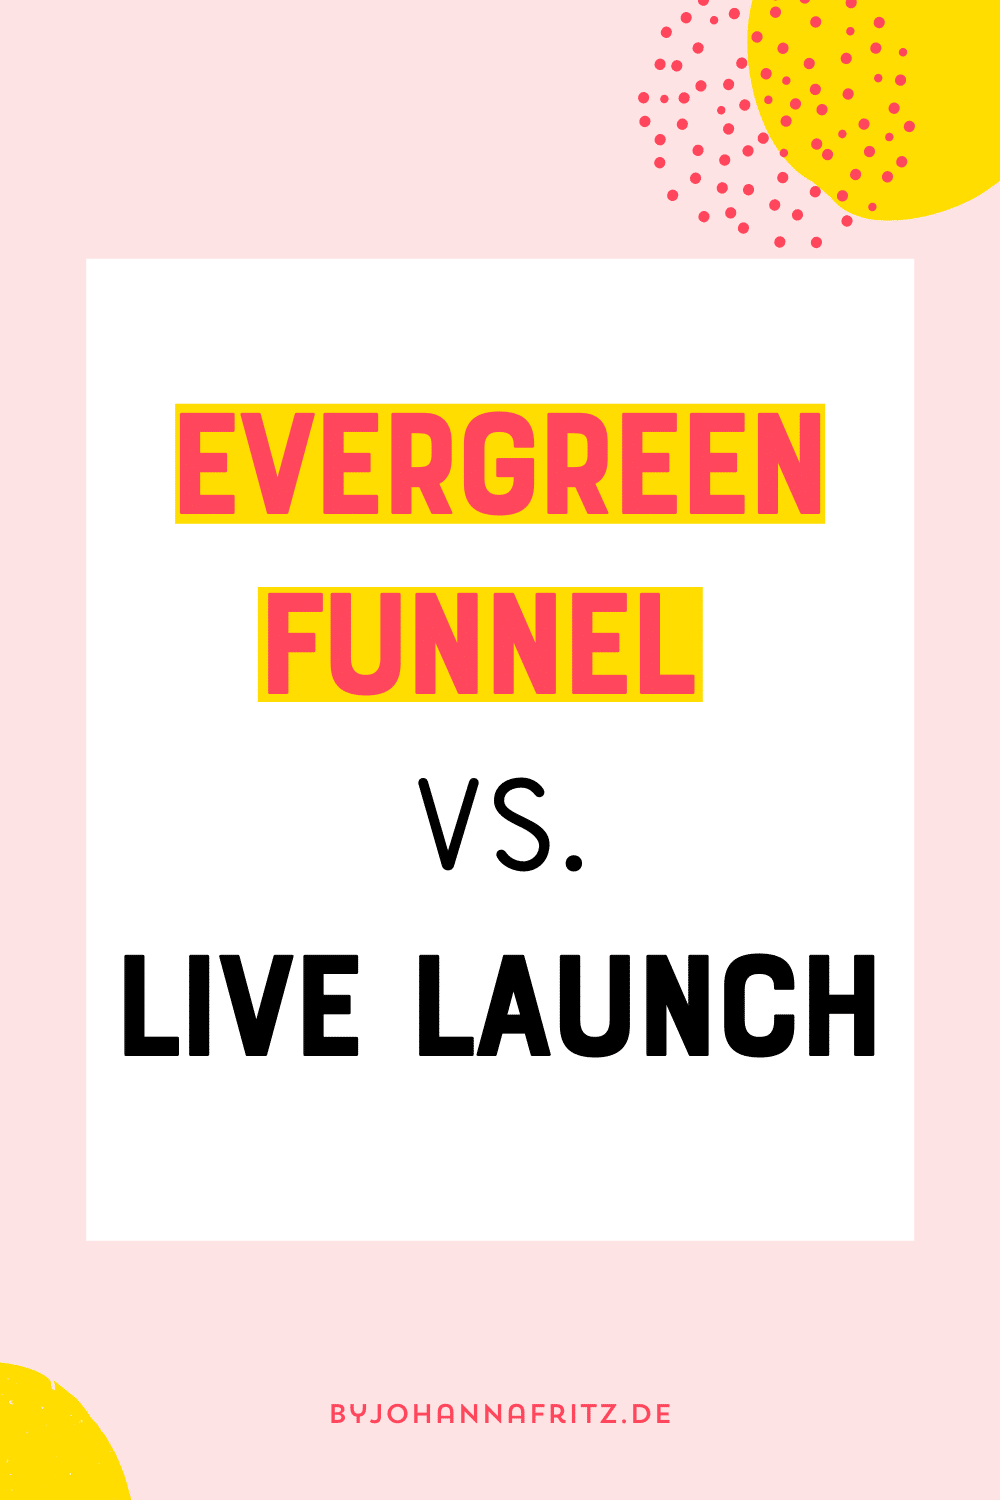 By Johanna Fritz - Live Launch vs. Evergreen Funnel